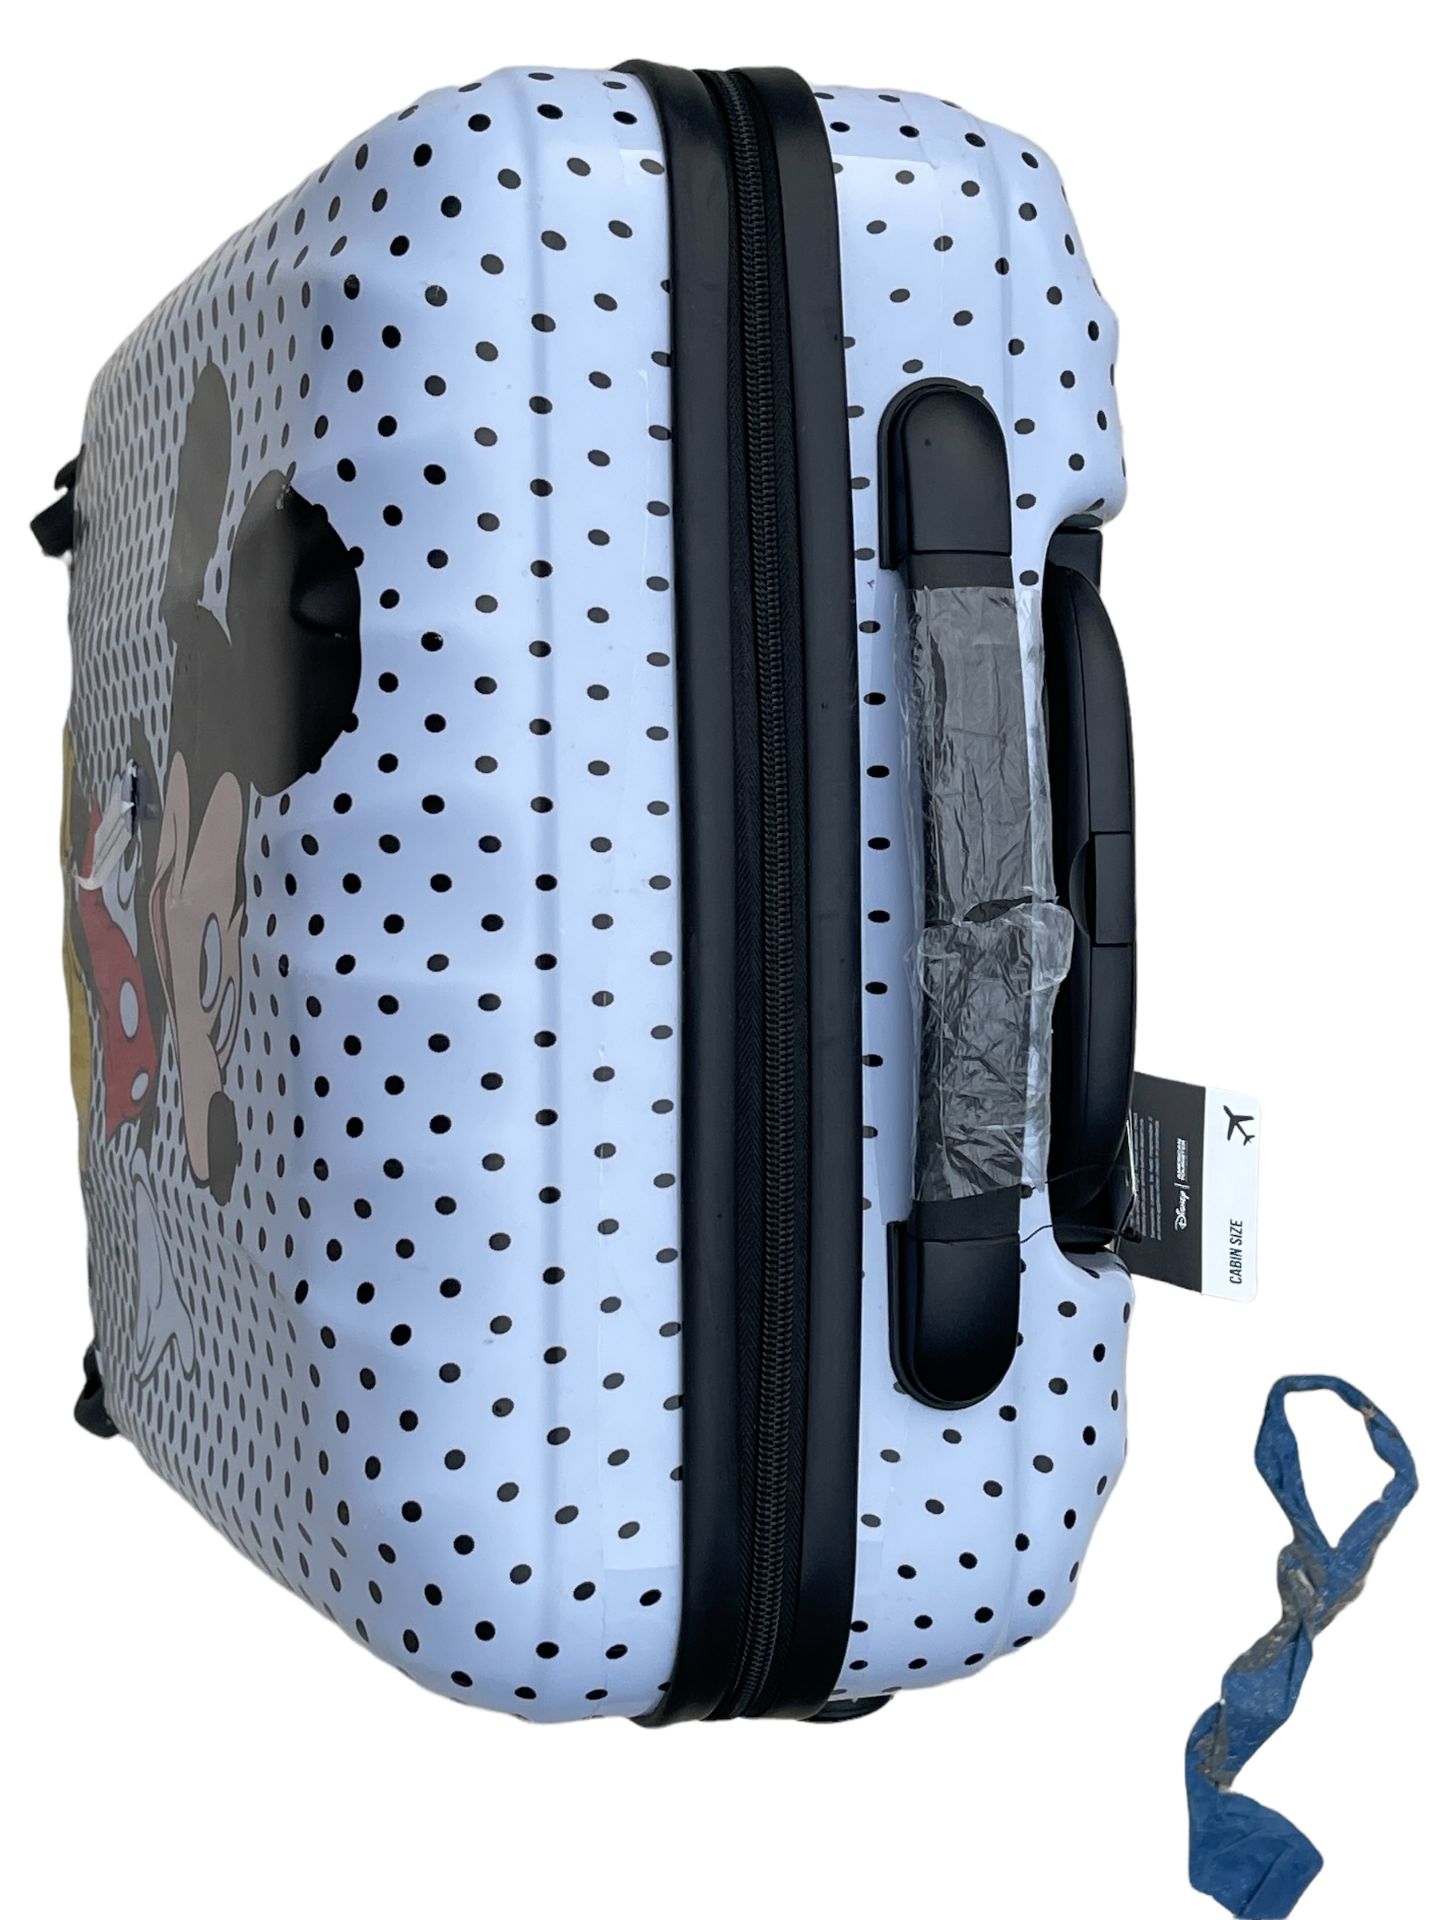 American Tourister Disney Mickey Mouse Polka Dot Carry-on Spinner Case 55cm - RRP £145 - Image 5 of 9